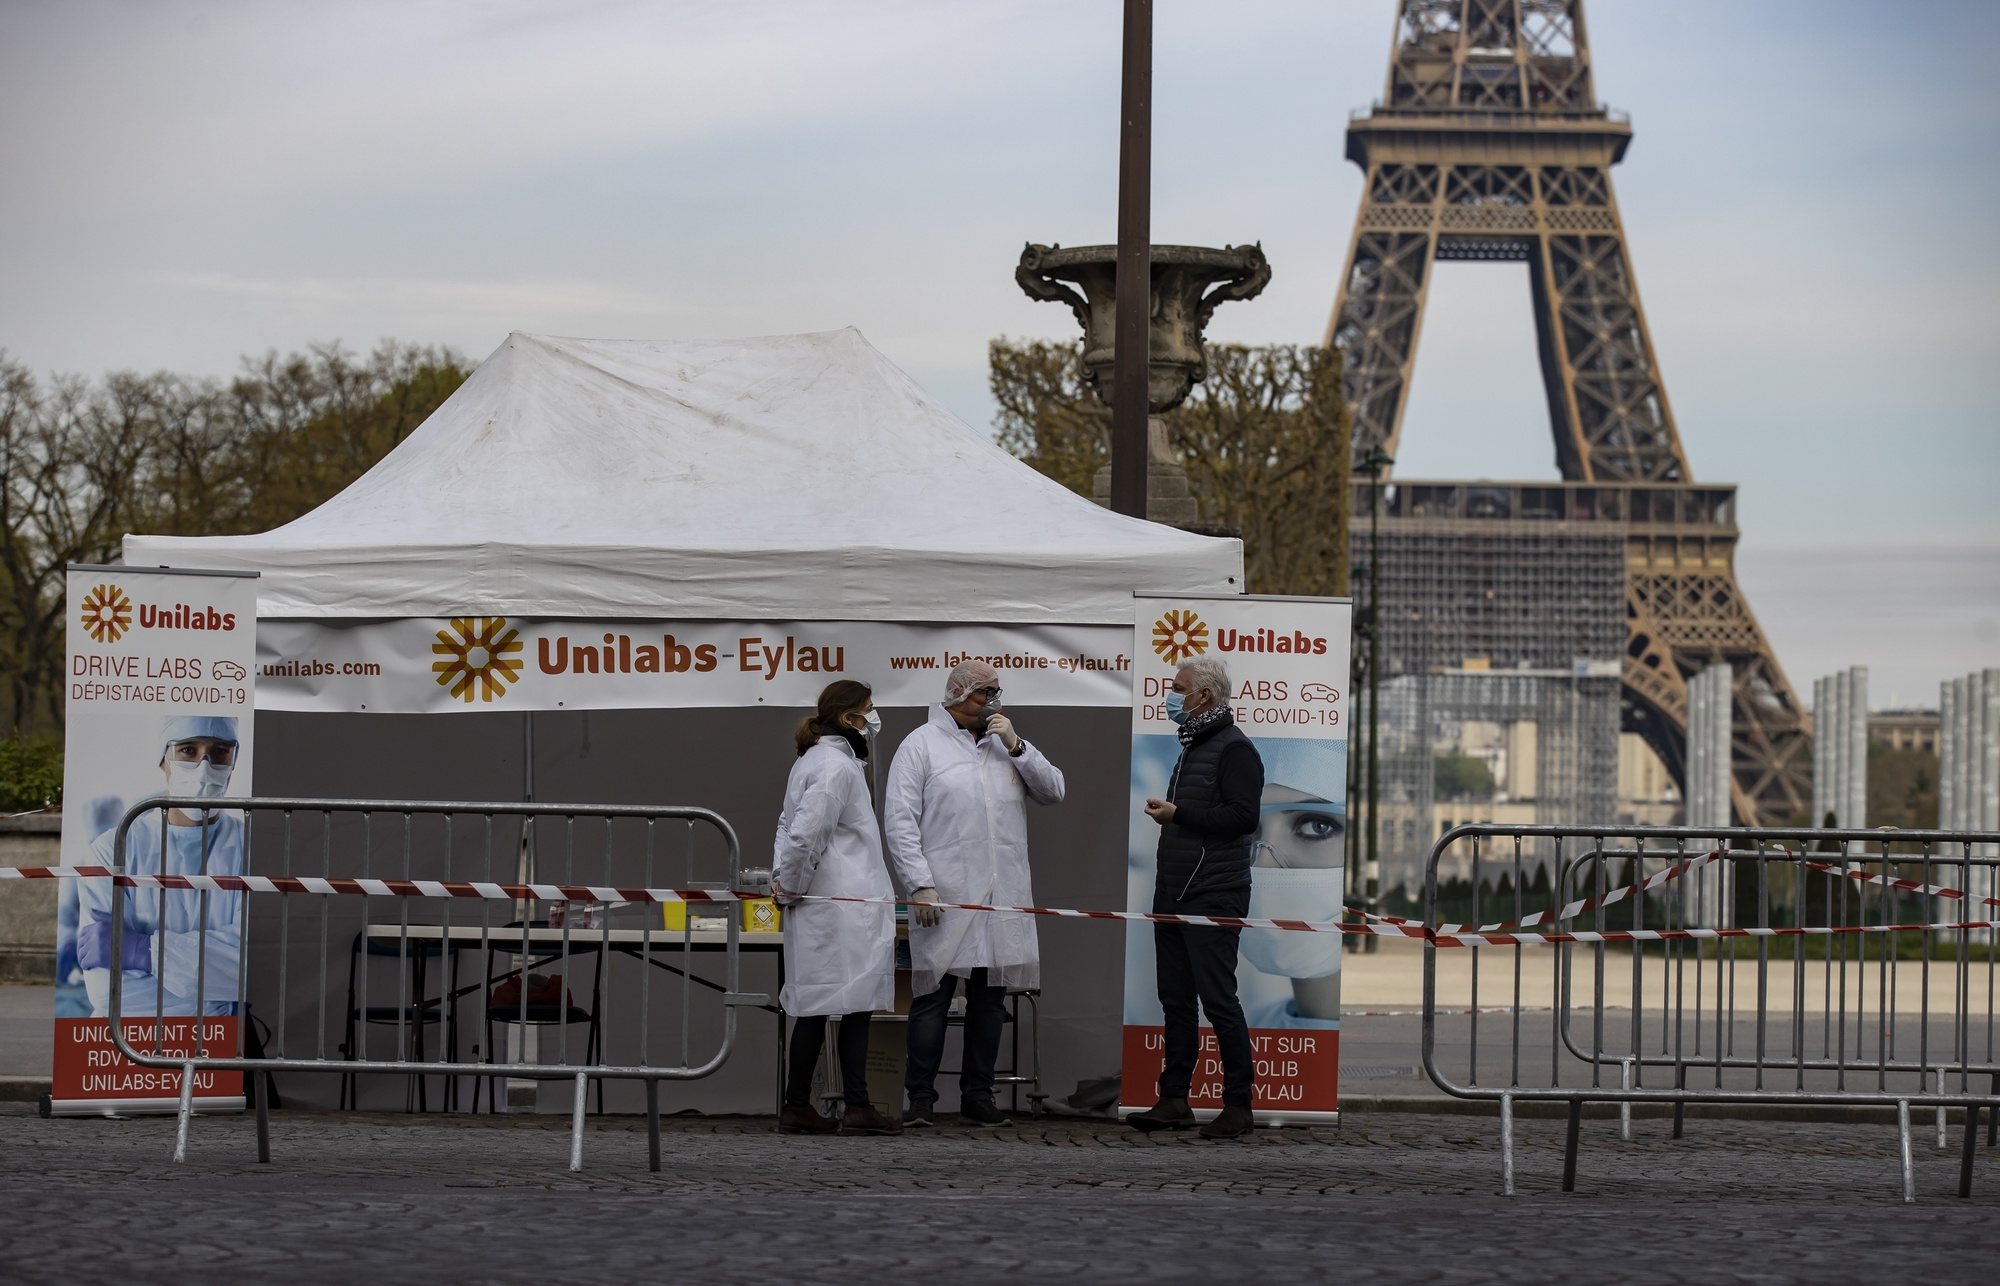 epa08348051 Doctors operate a drive-through coronavirus testing site  near the Eiffel Tower to test medical professionals for Covid-19, in Paris,  France, 07 April 2020. France is under lockdown in an attempt to quell the widespread of the coronavirus.  EPA/IAN LANGSDON